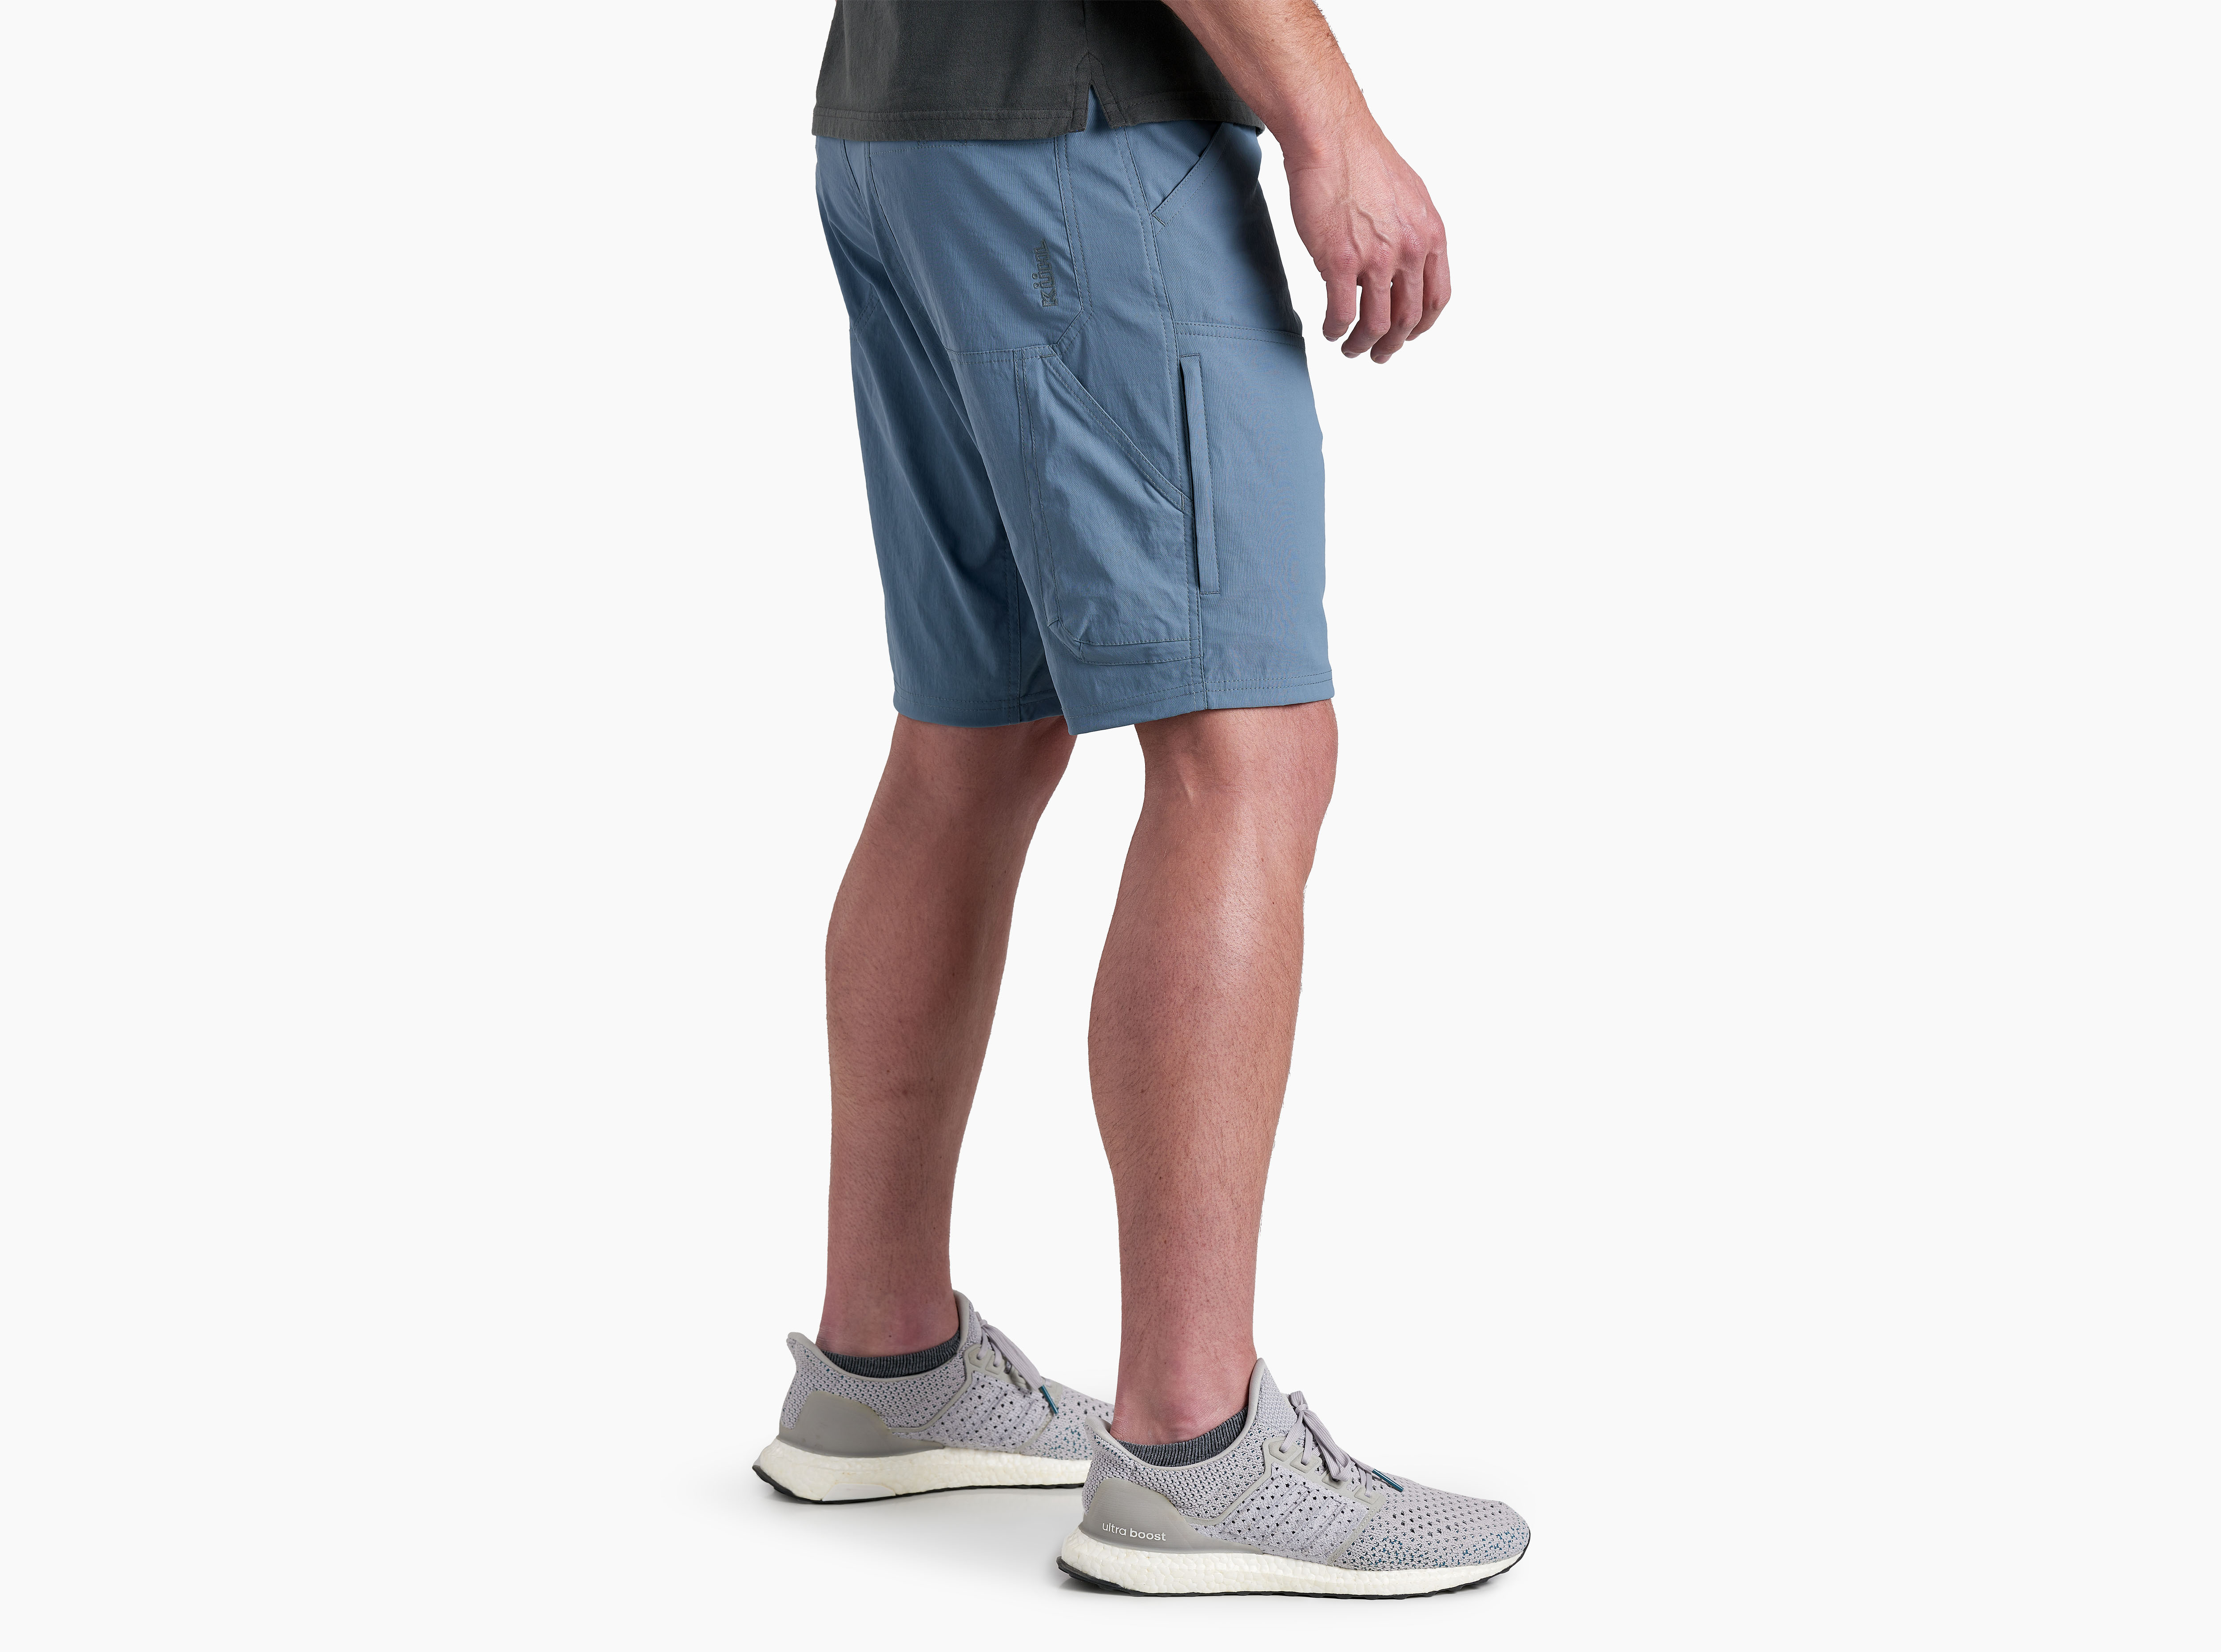 Start your summer with KÜHL's Renegade shorts and Karib Stripe